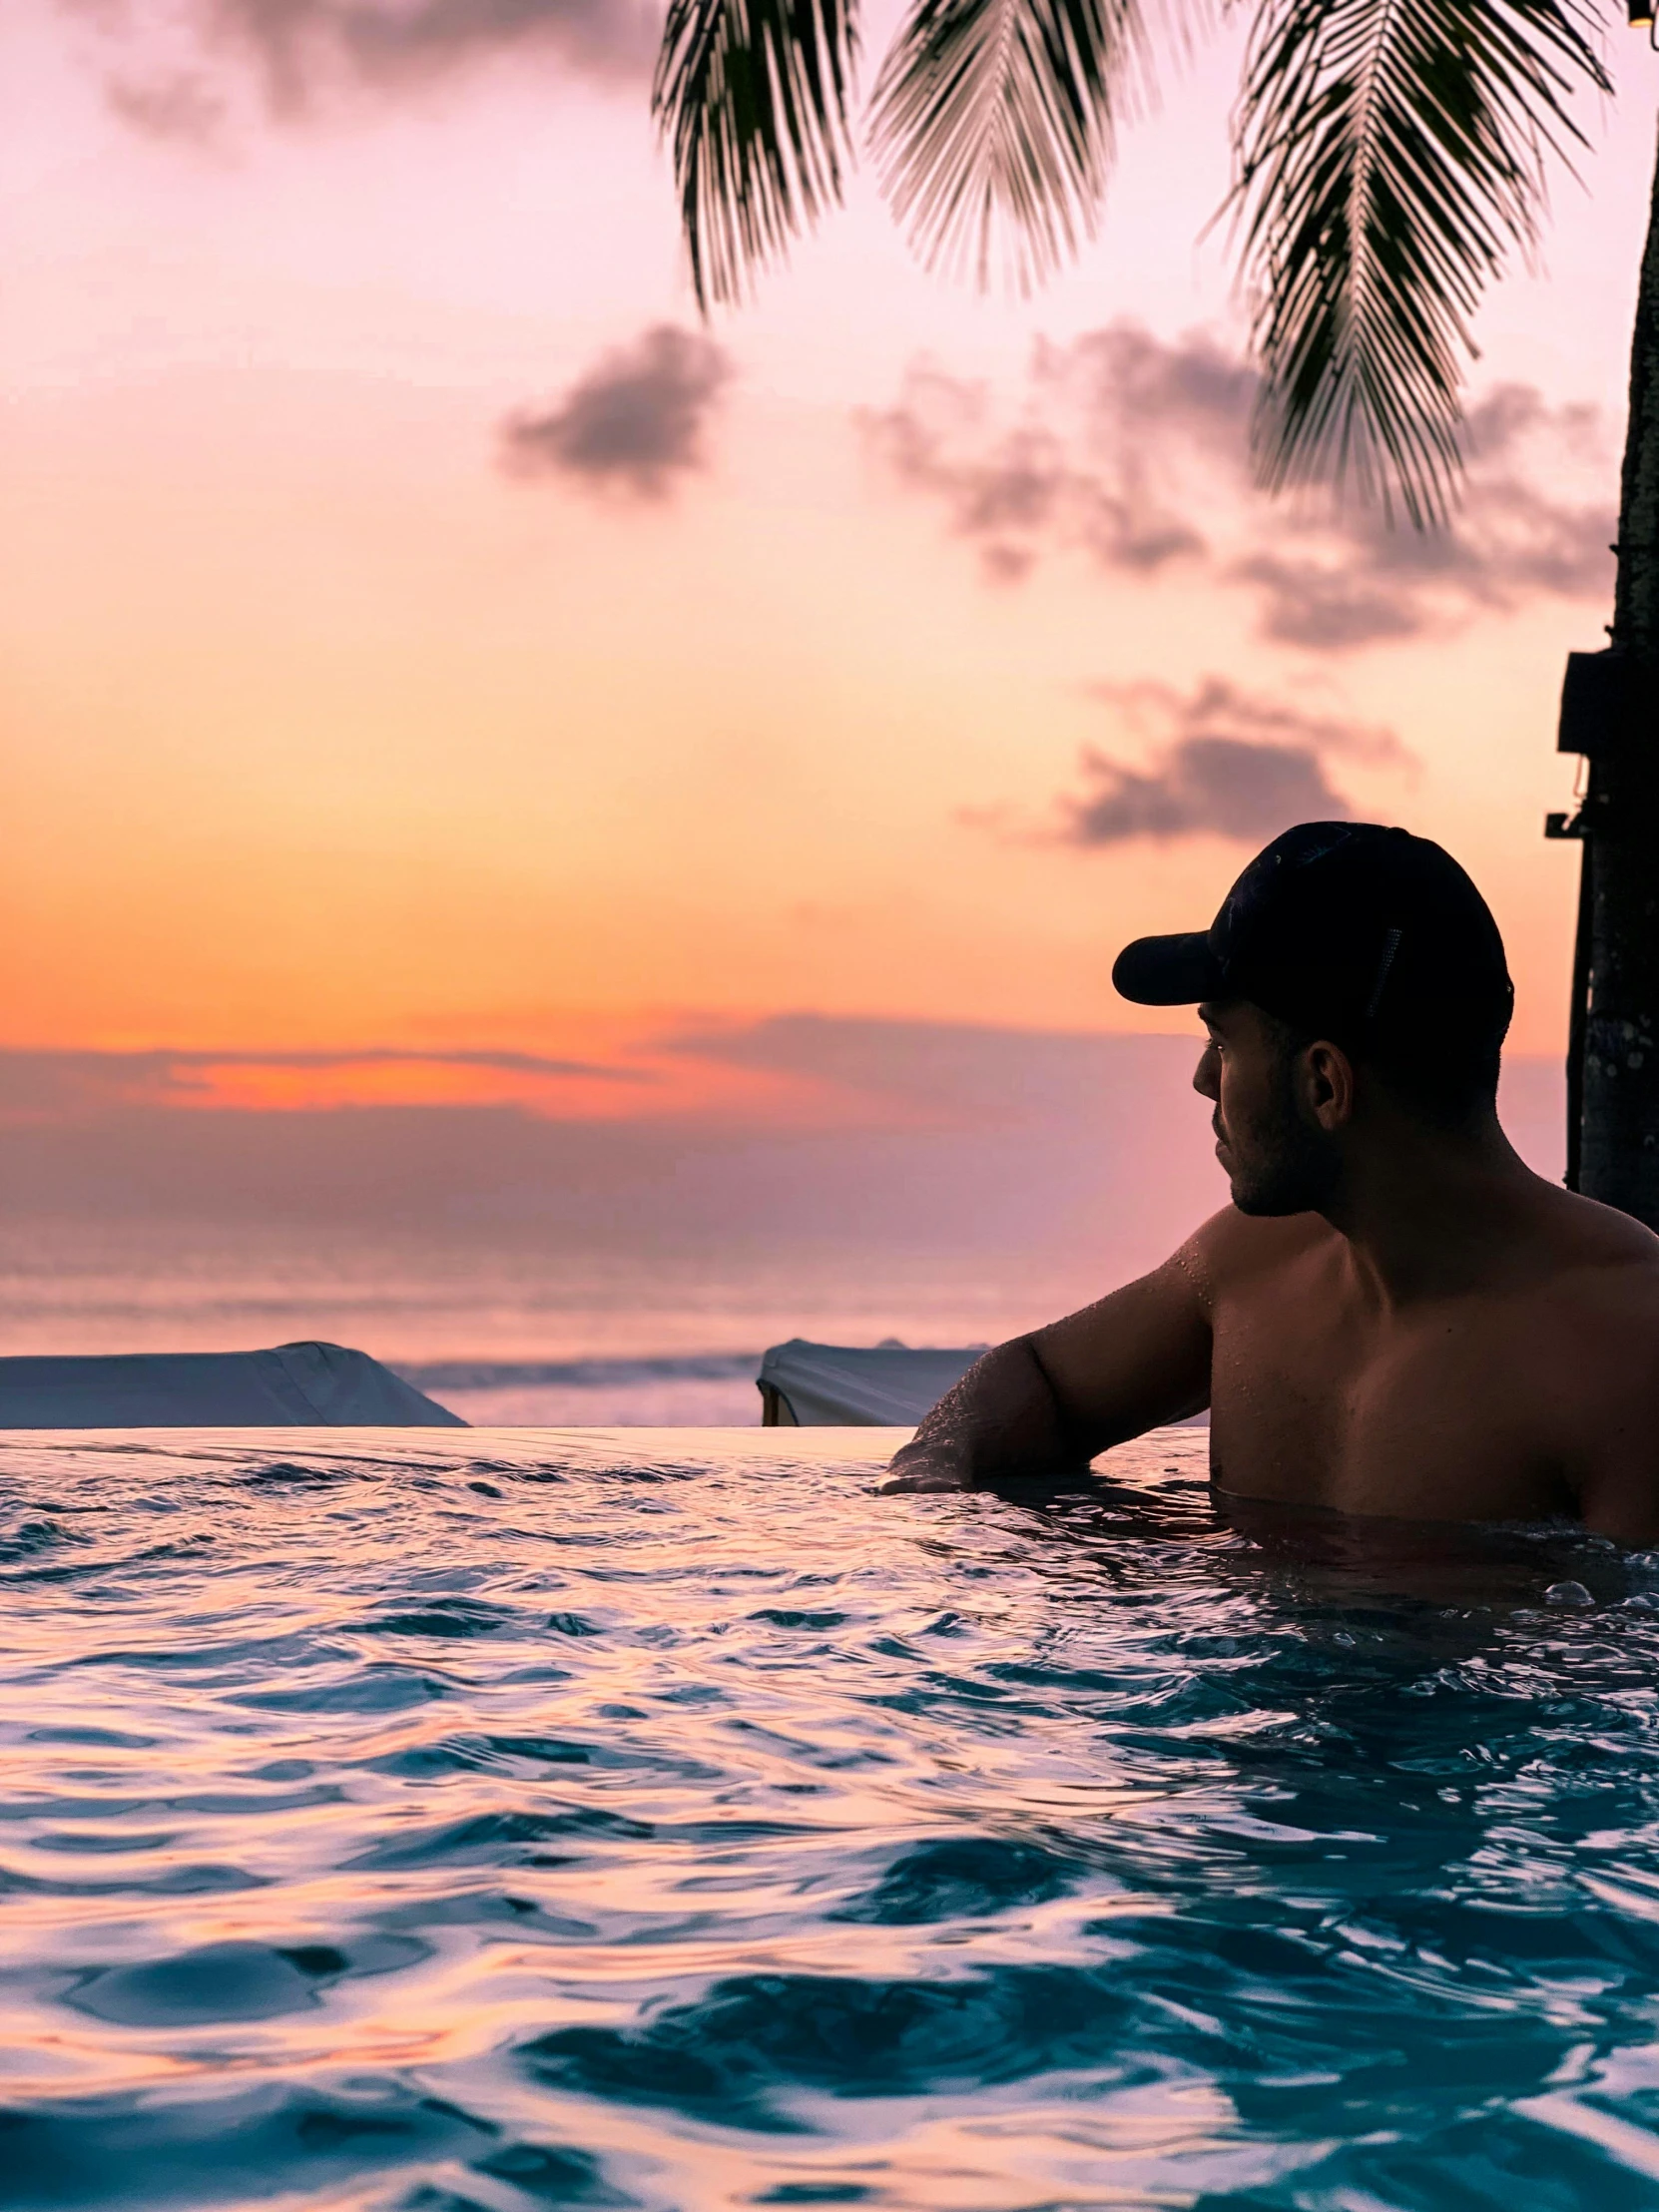 man in water pool with palm trees during sunset